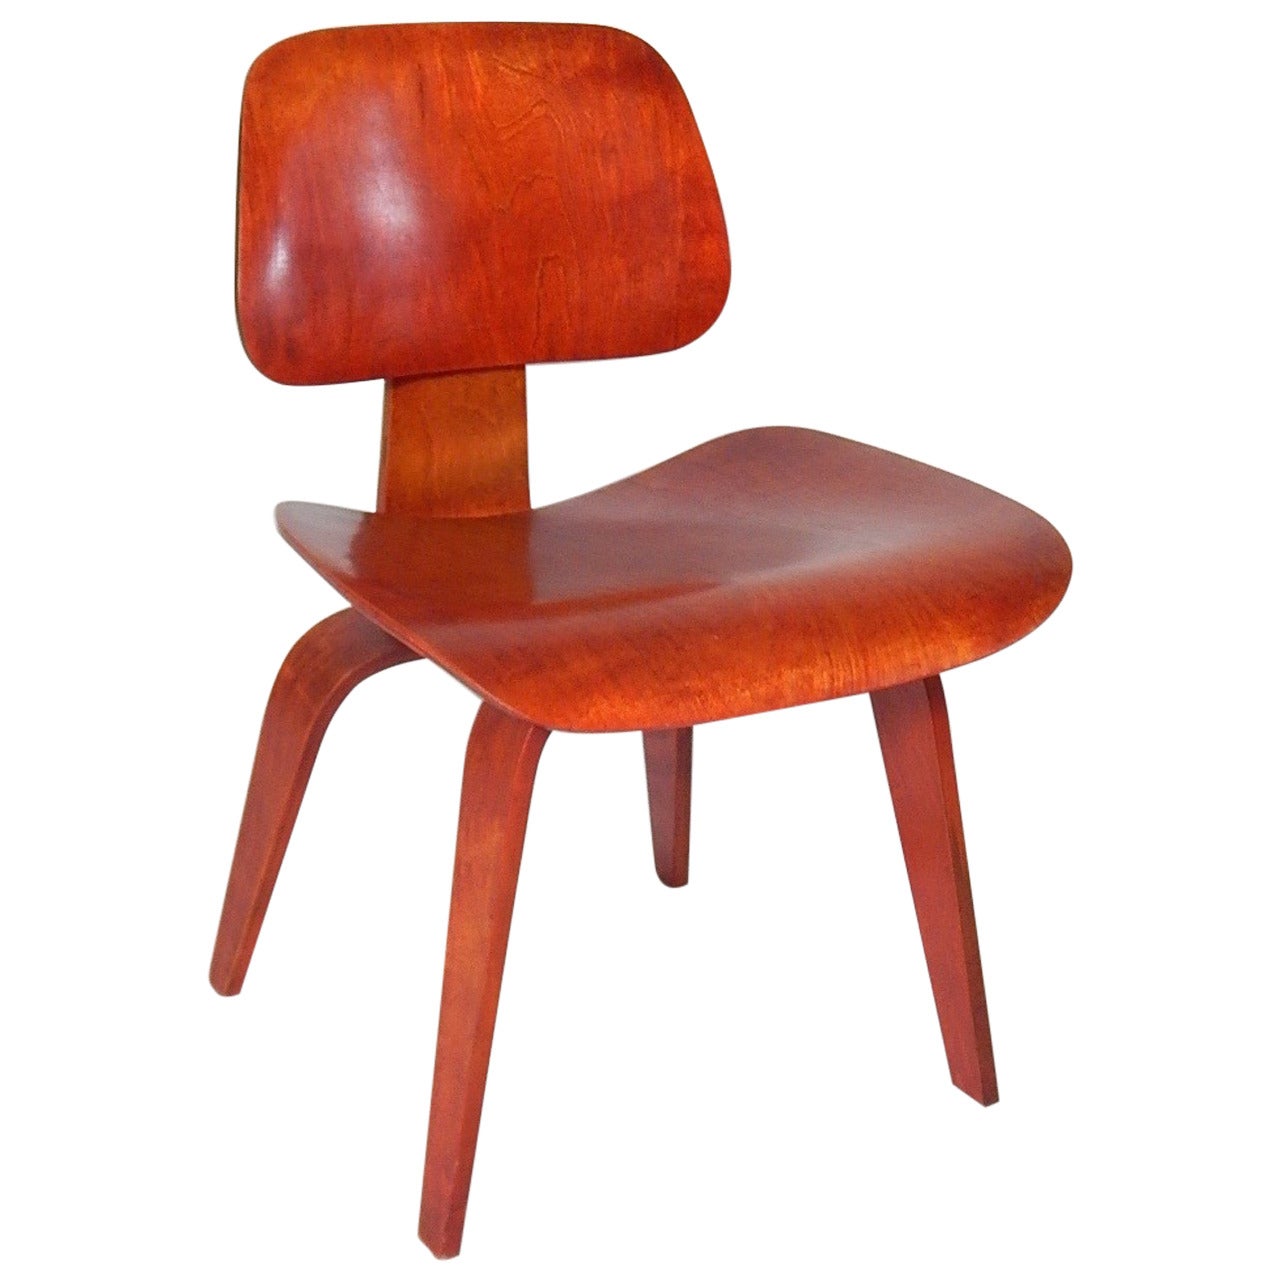 Charles and Ray Eames DCW in Red Aniline, 1950s